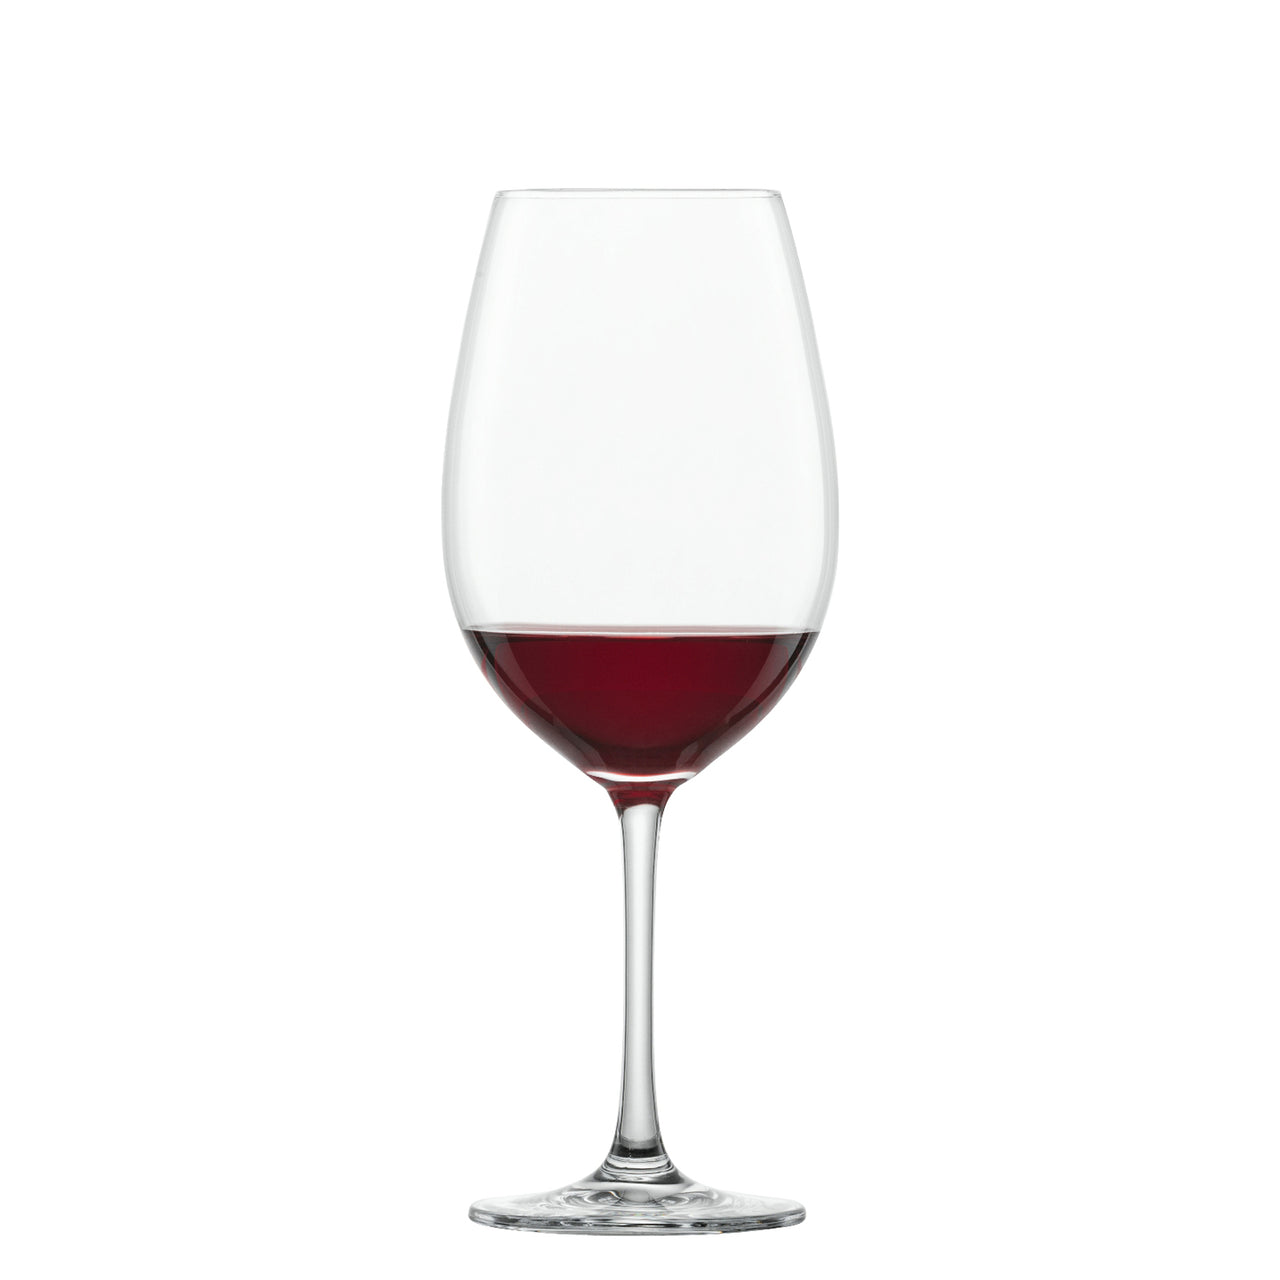 Zwiesel Ivento Tritan Red Wine Glass / Set of 6